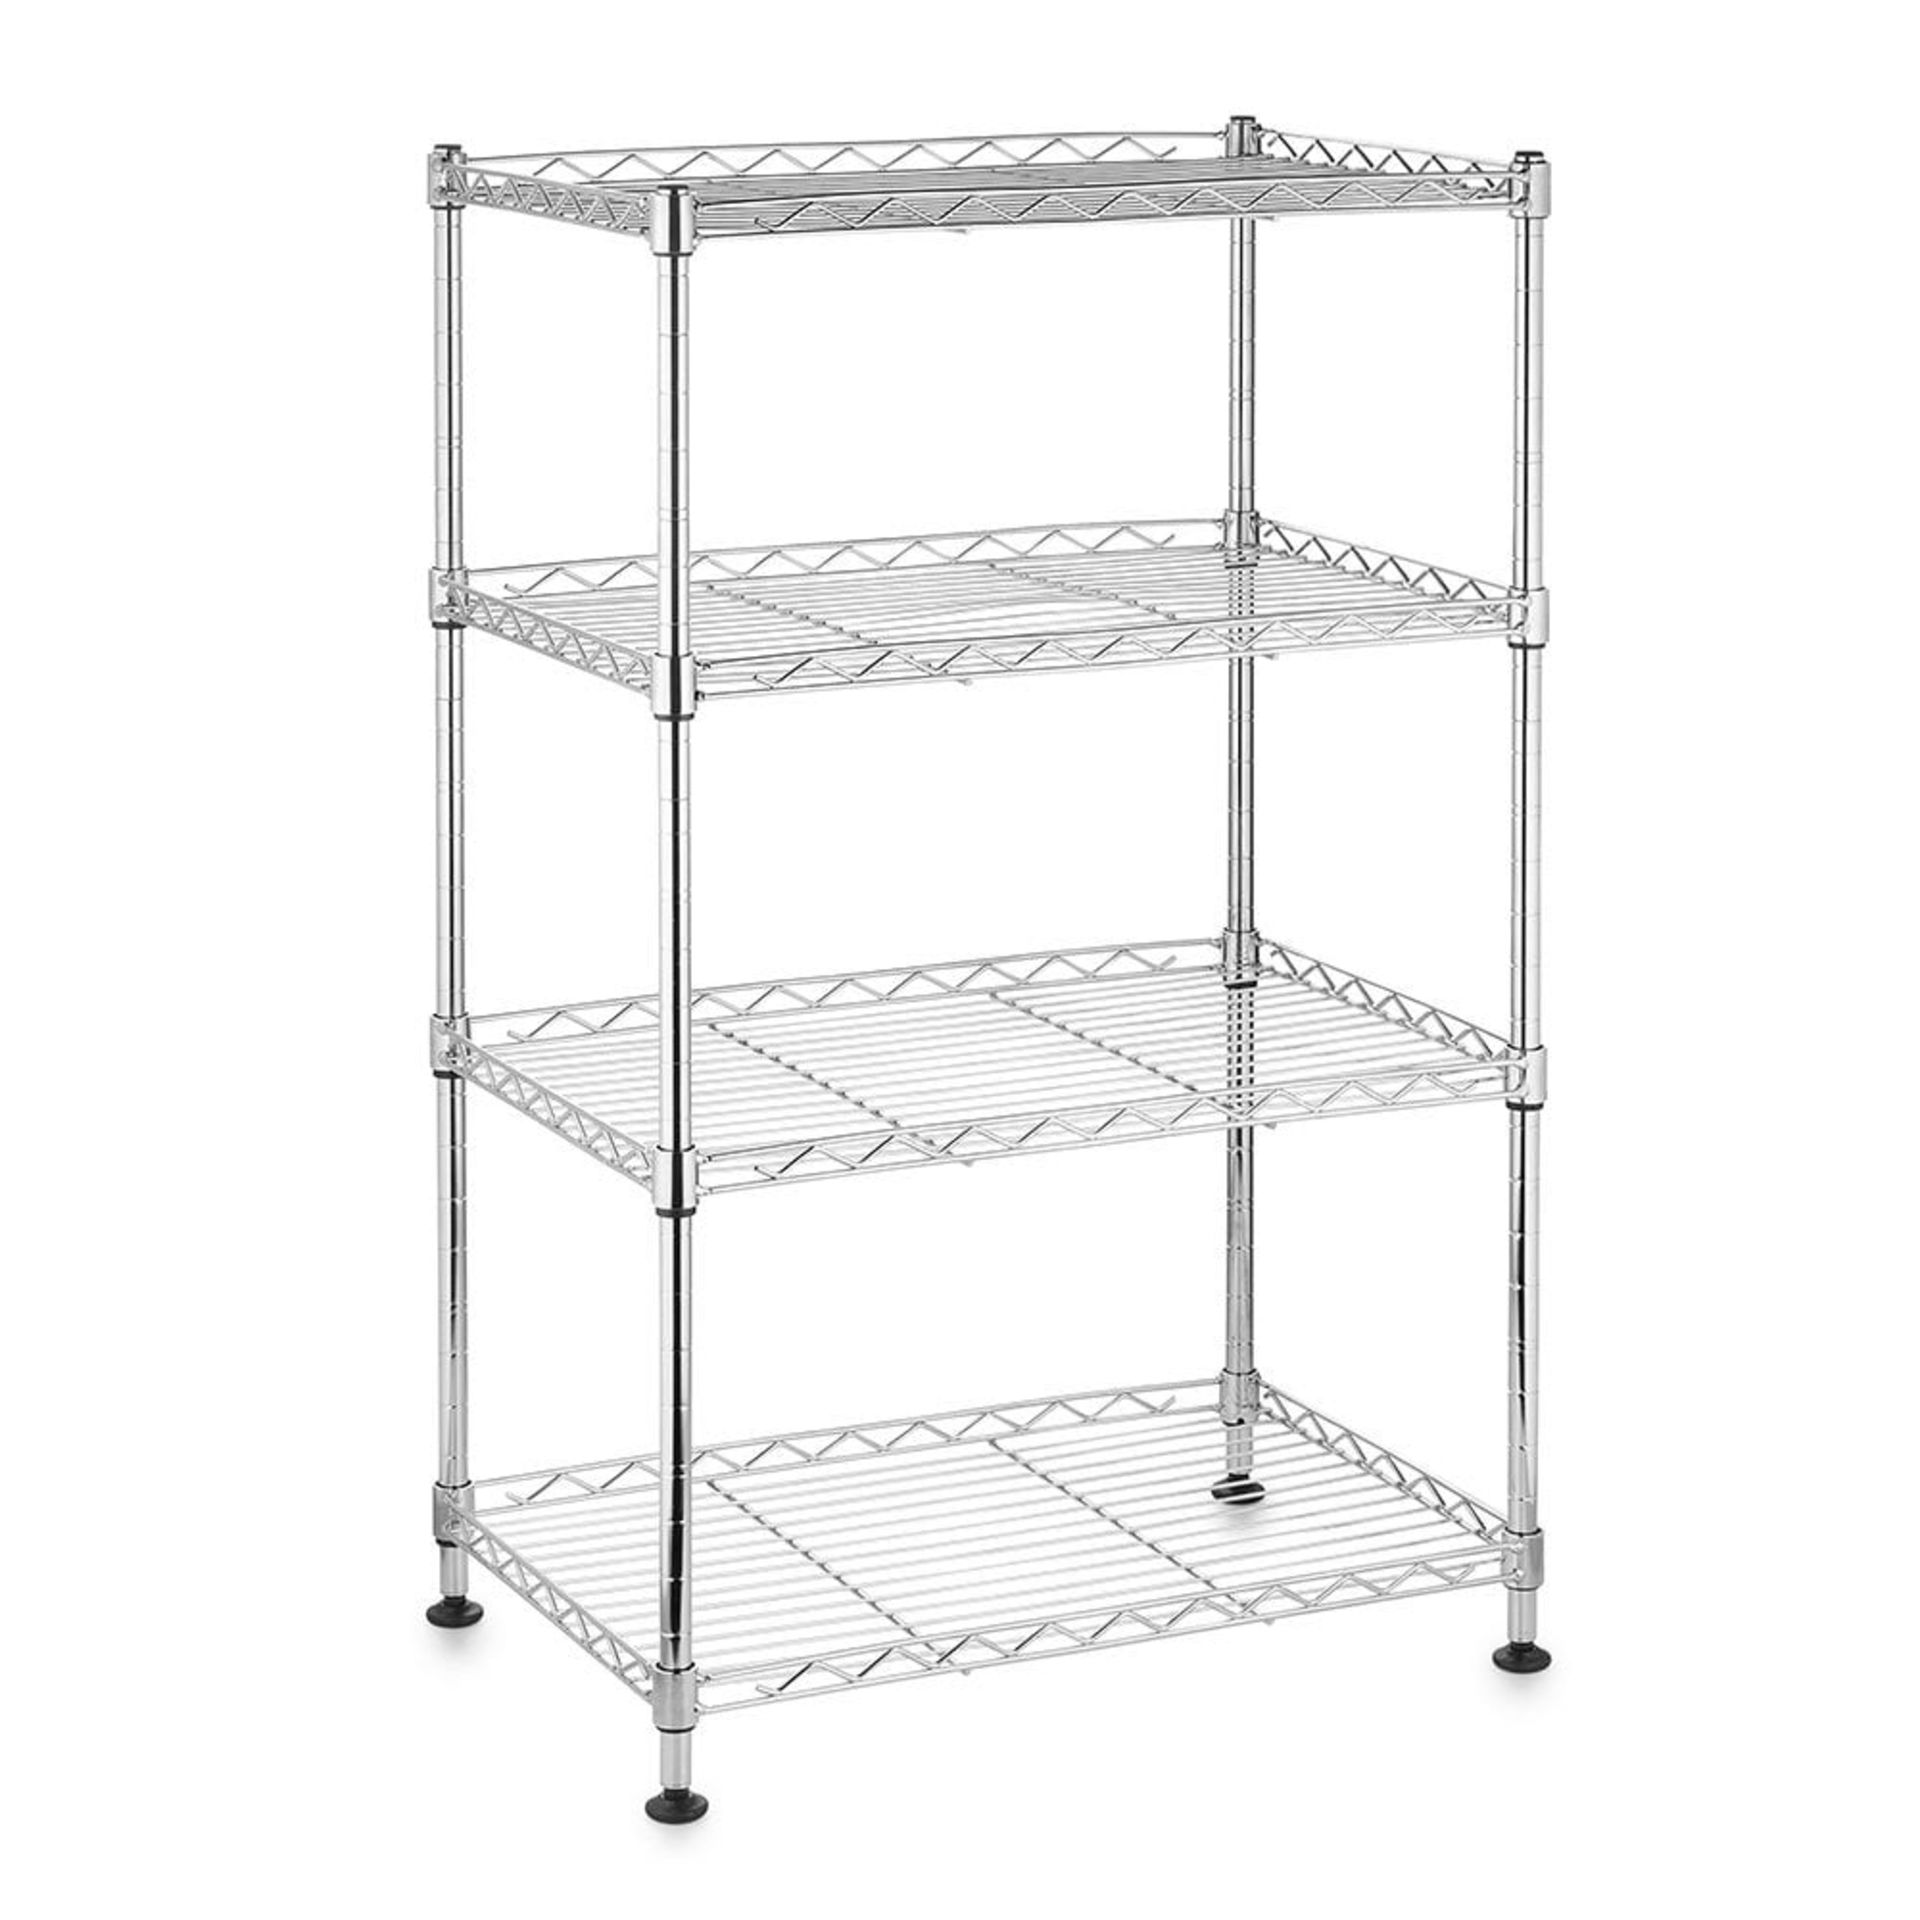 Chrome Wire Shelving - Image 2 of 2